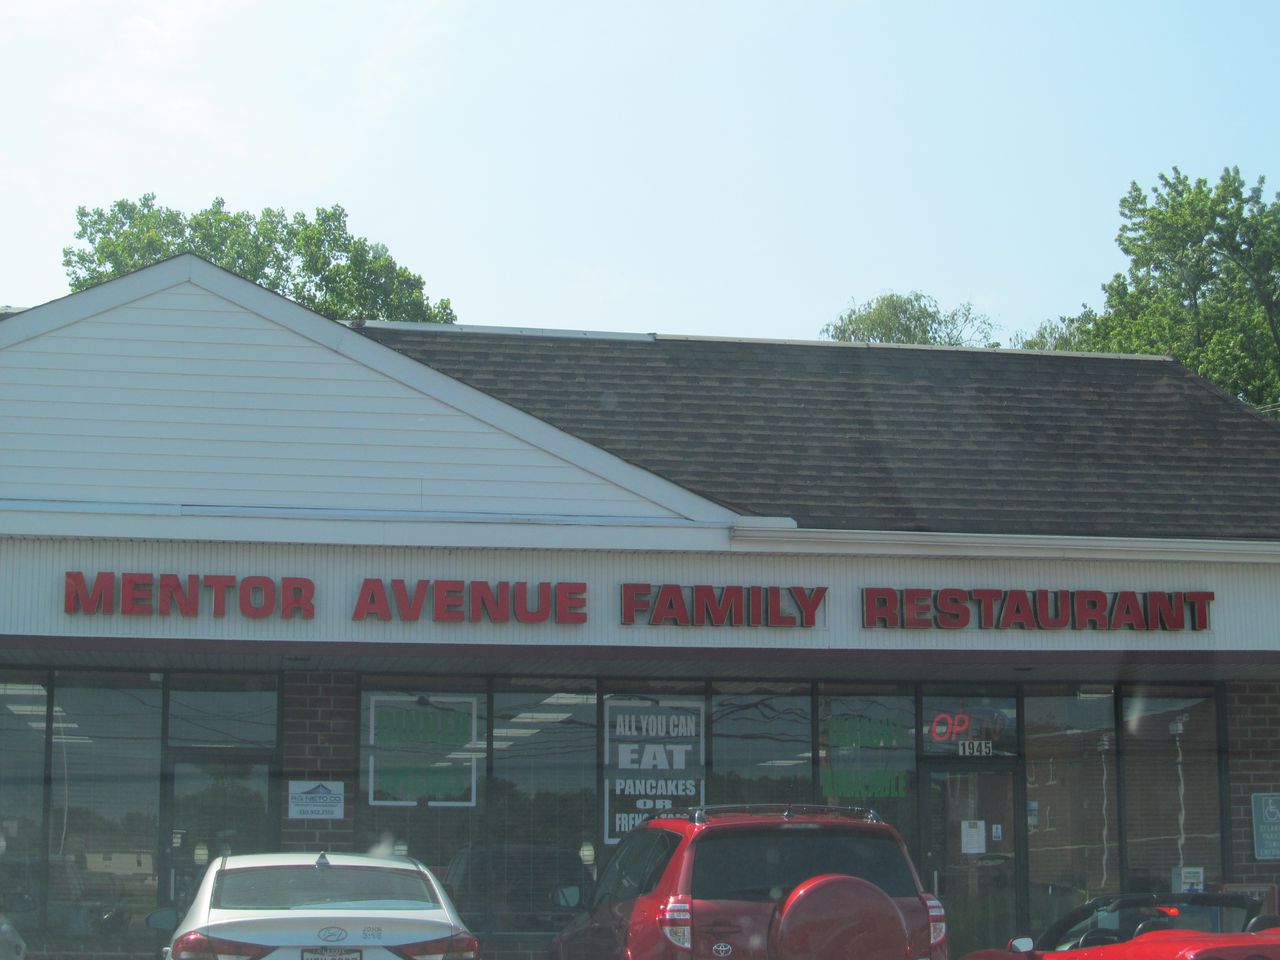 Mentor Avenue Family Restaurant has one of the highest health inspector violation counts in Lake County.